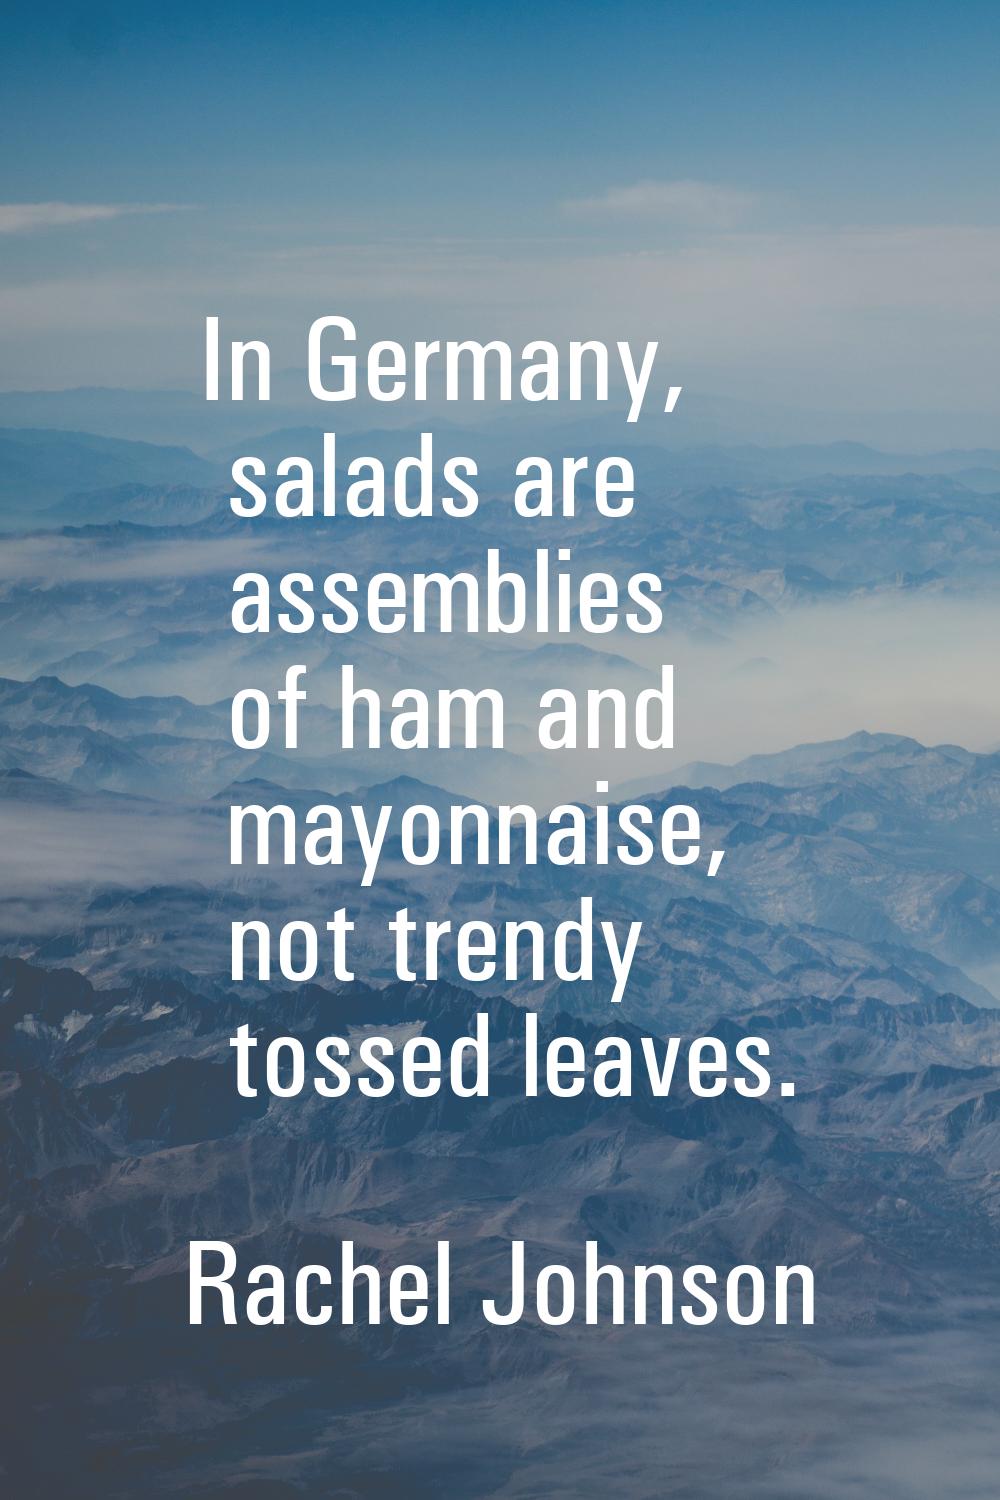 In Germany, salads are assemblies of ham and mayonnaise, not trendy tossed leaves.